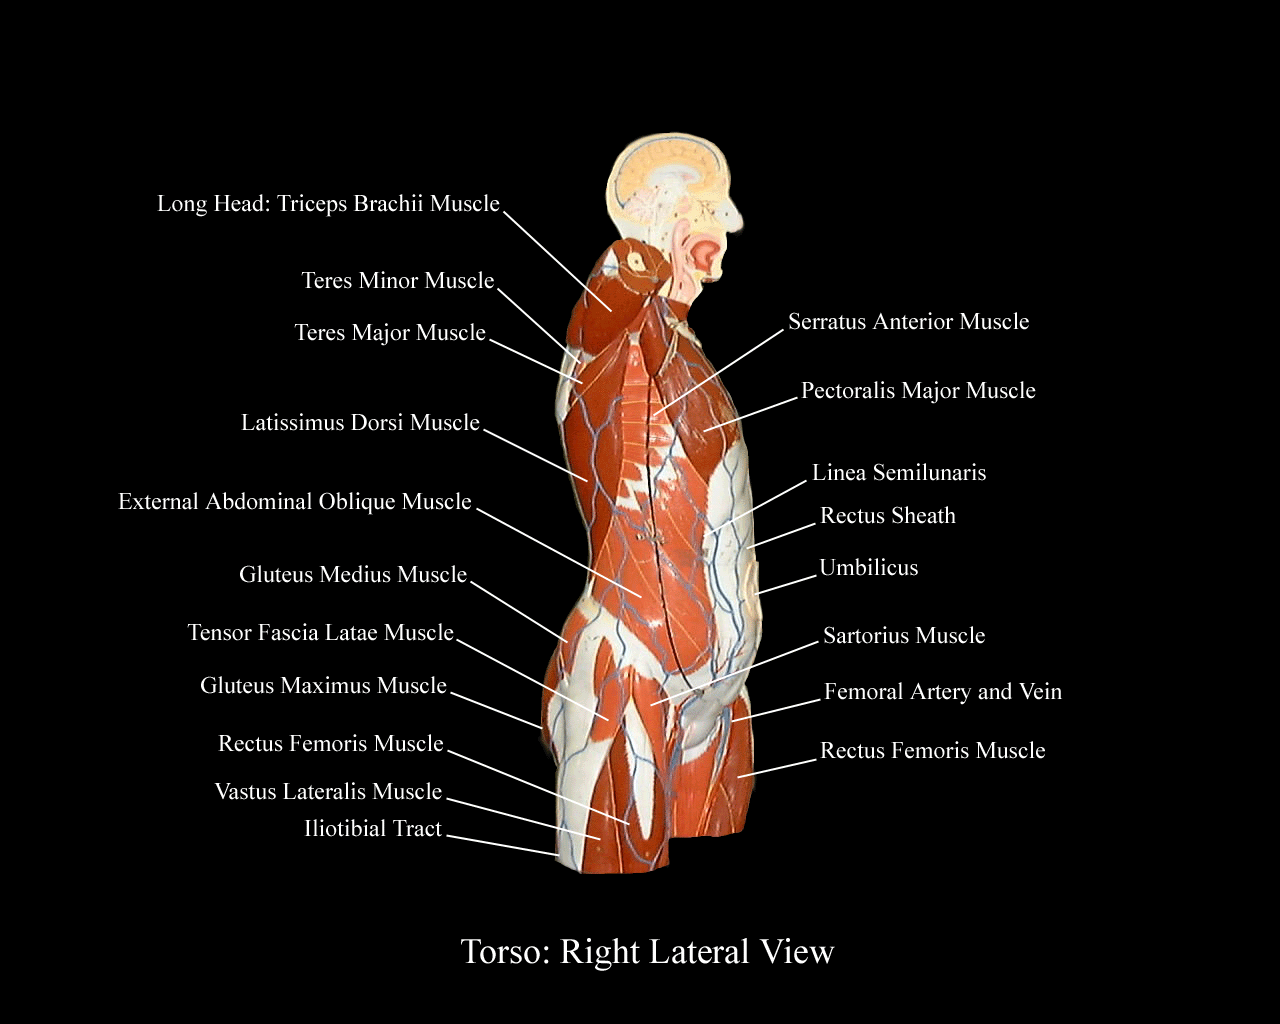 a labeled picture indicating the muscles on a torso model from a right lateral view